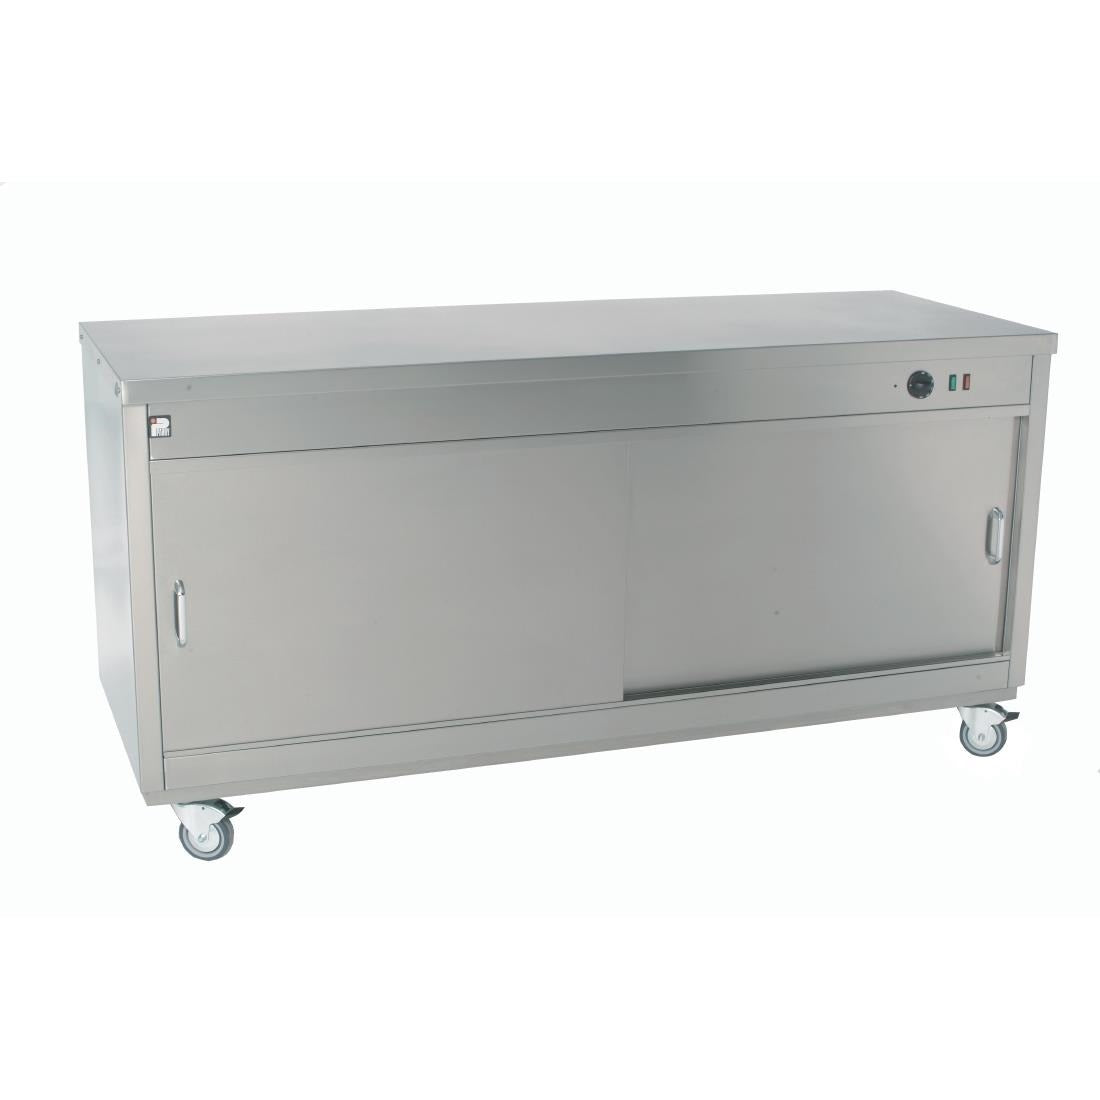 Parry Hot Cupboard HOT12 - GM708 Hot Cupboards Parry   